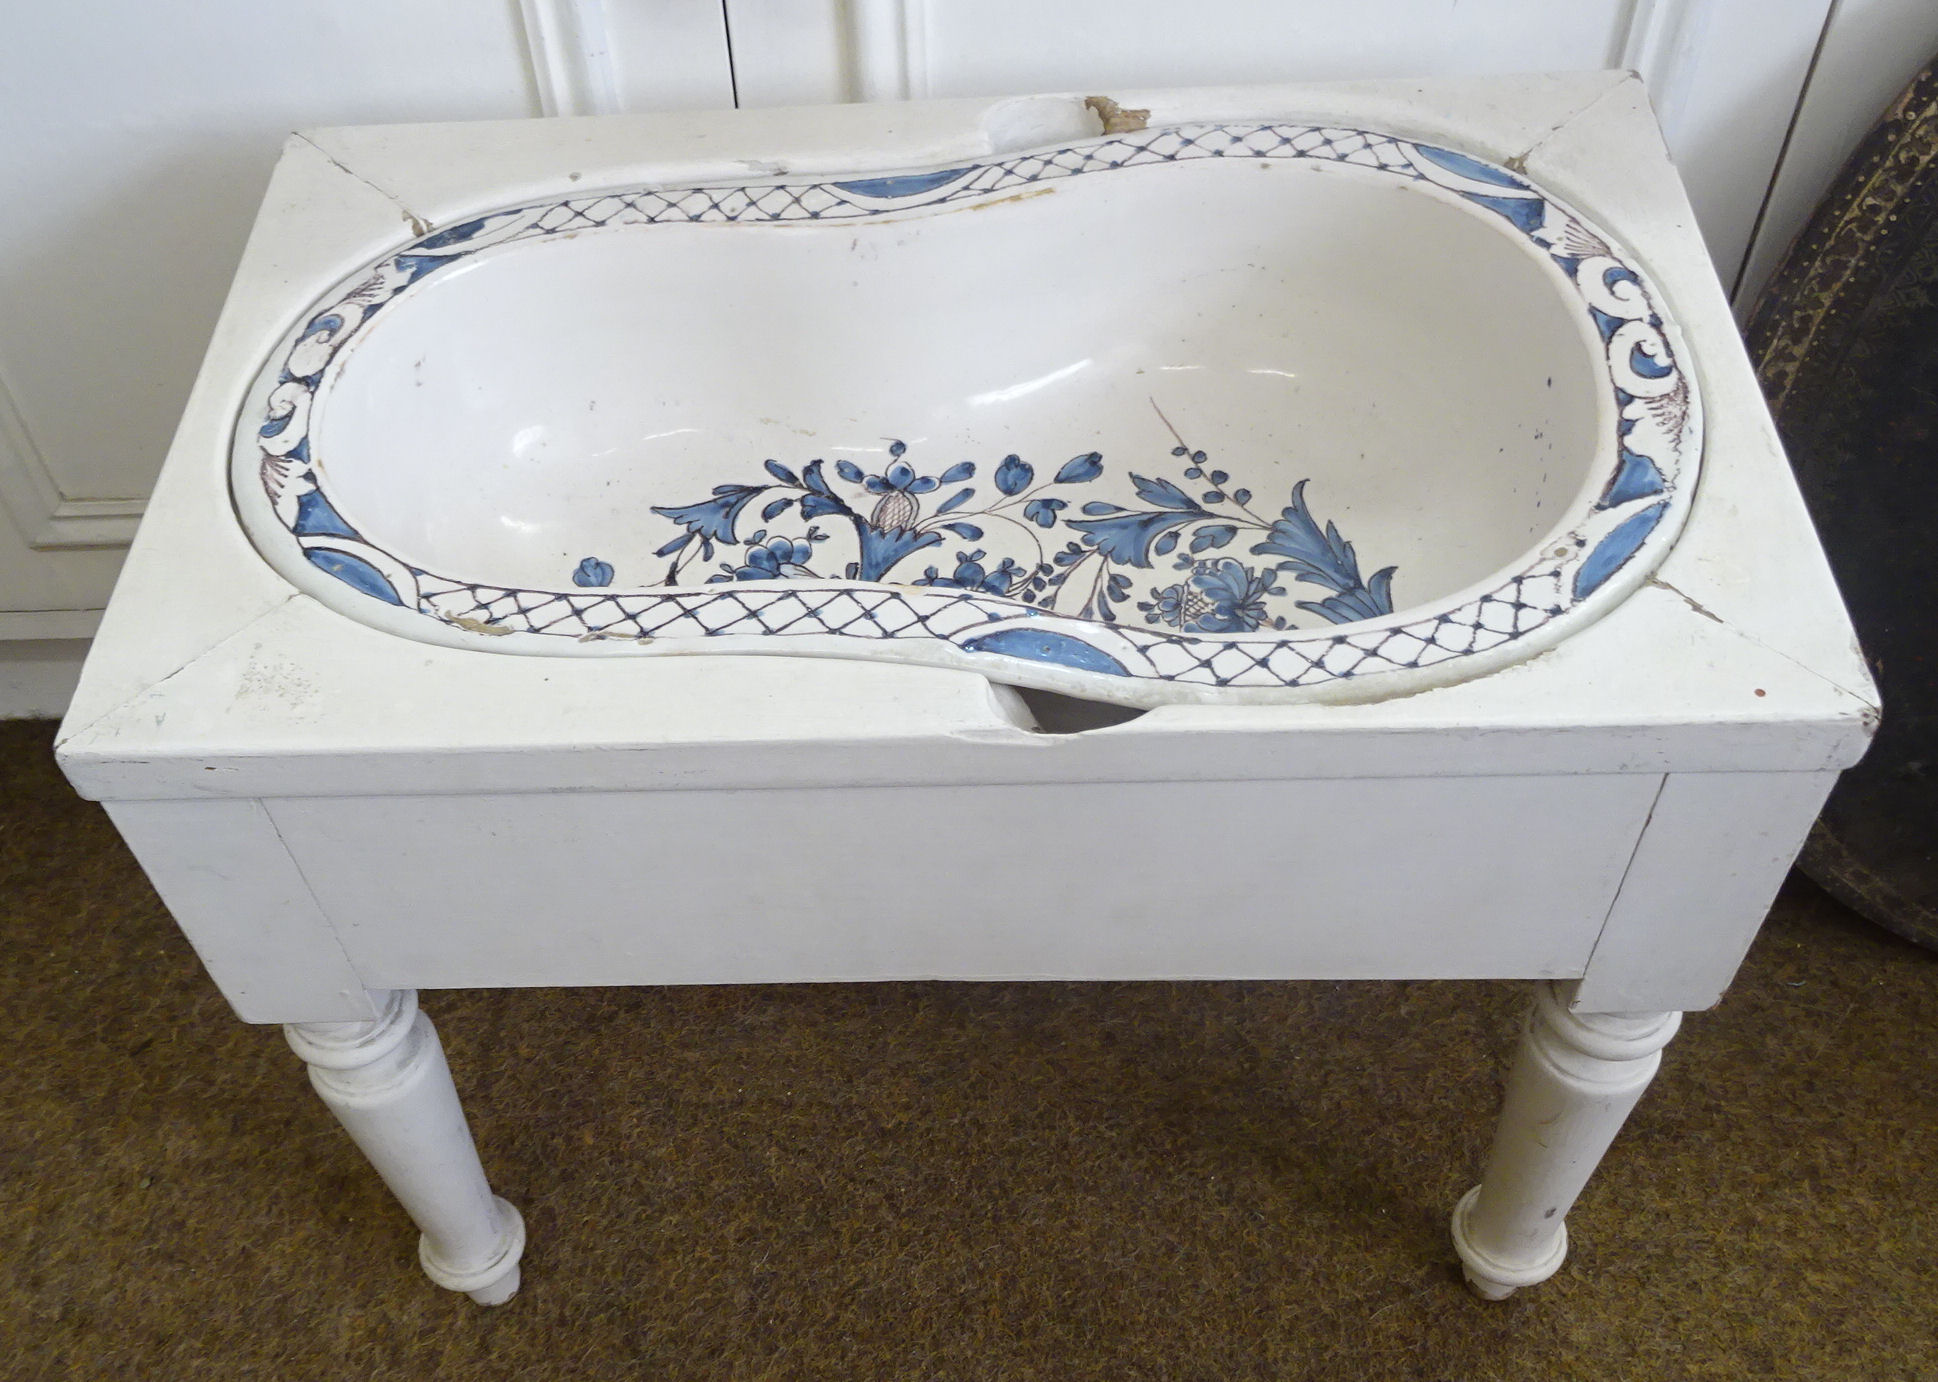 A French Faience Bidet Liner decorated in blue and white with trailing leaves and flowers, the - Image 2 of 2